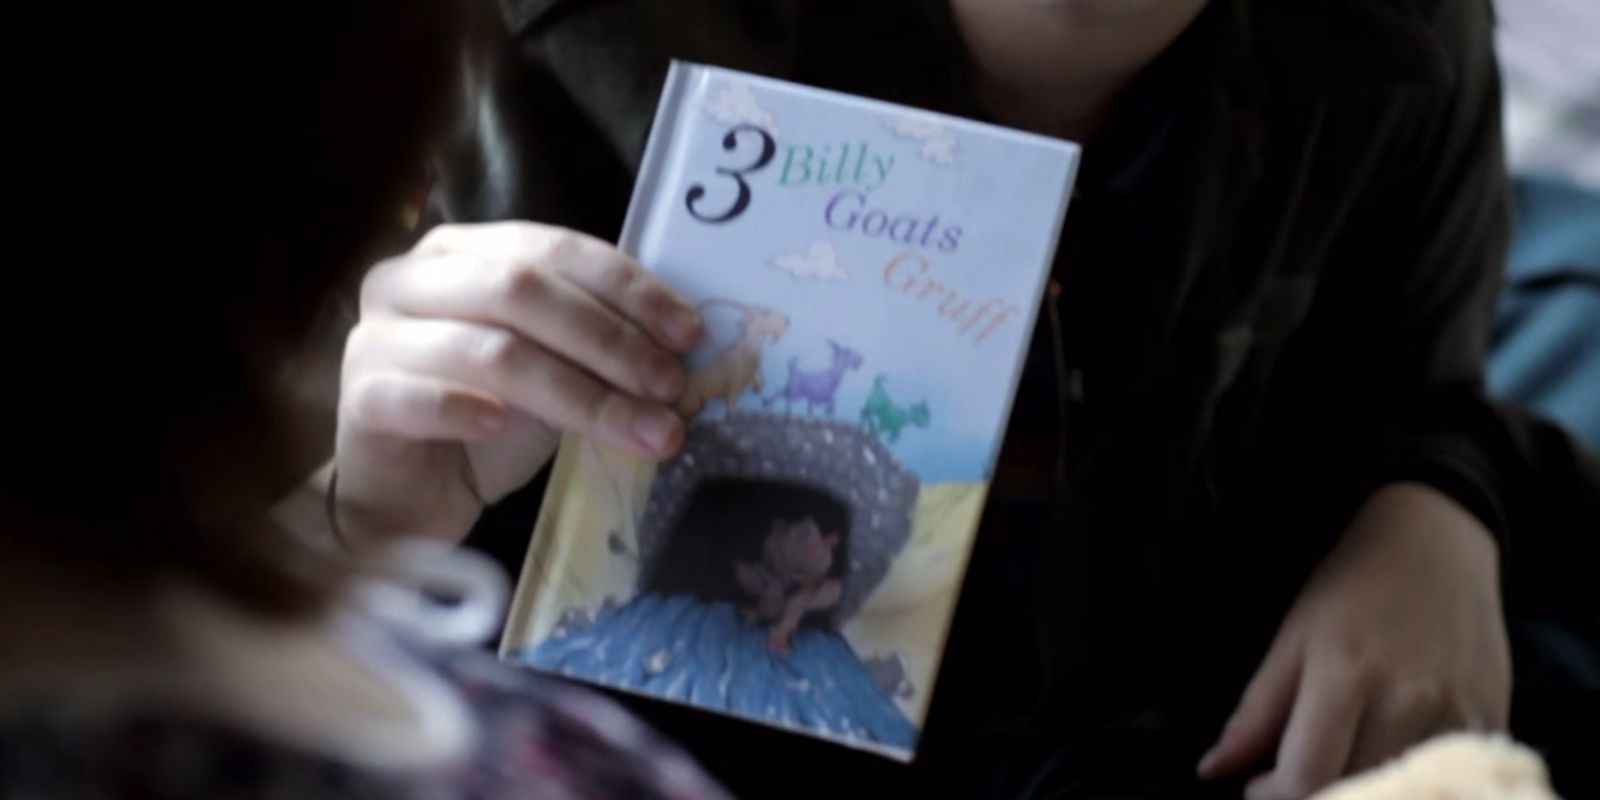 Callie gives Tricia The 3 Billy Goats Gruff in Absentia